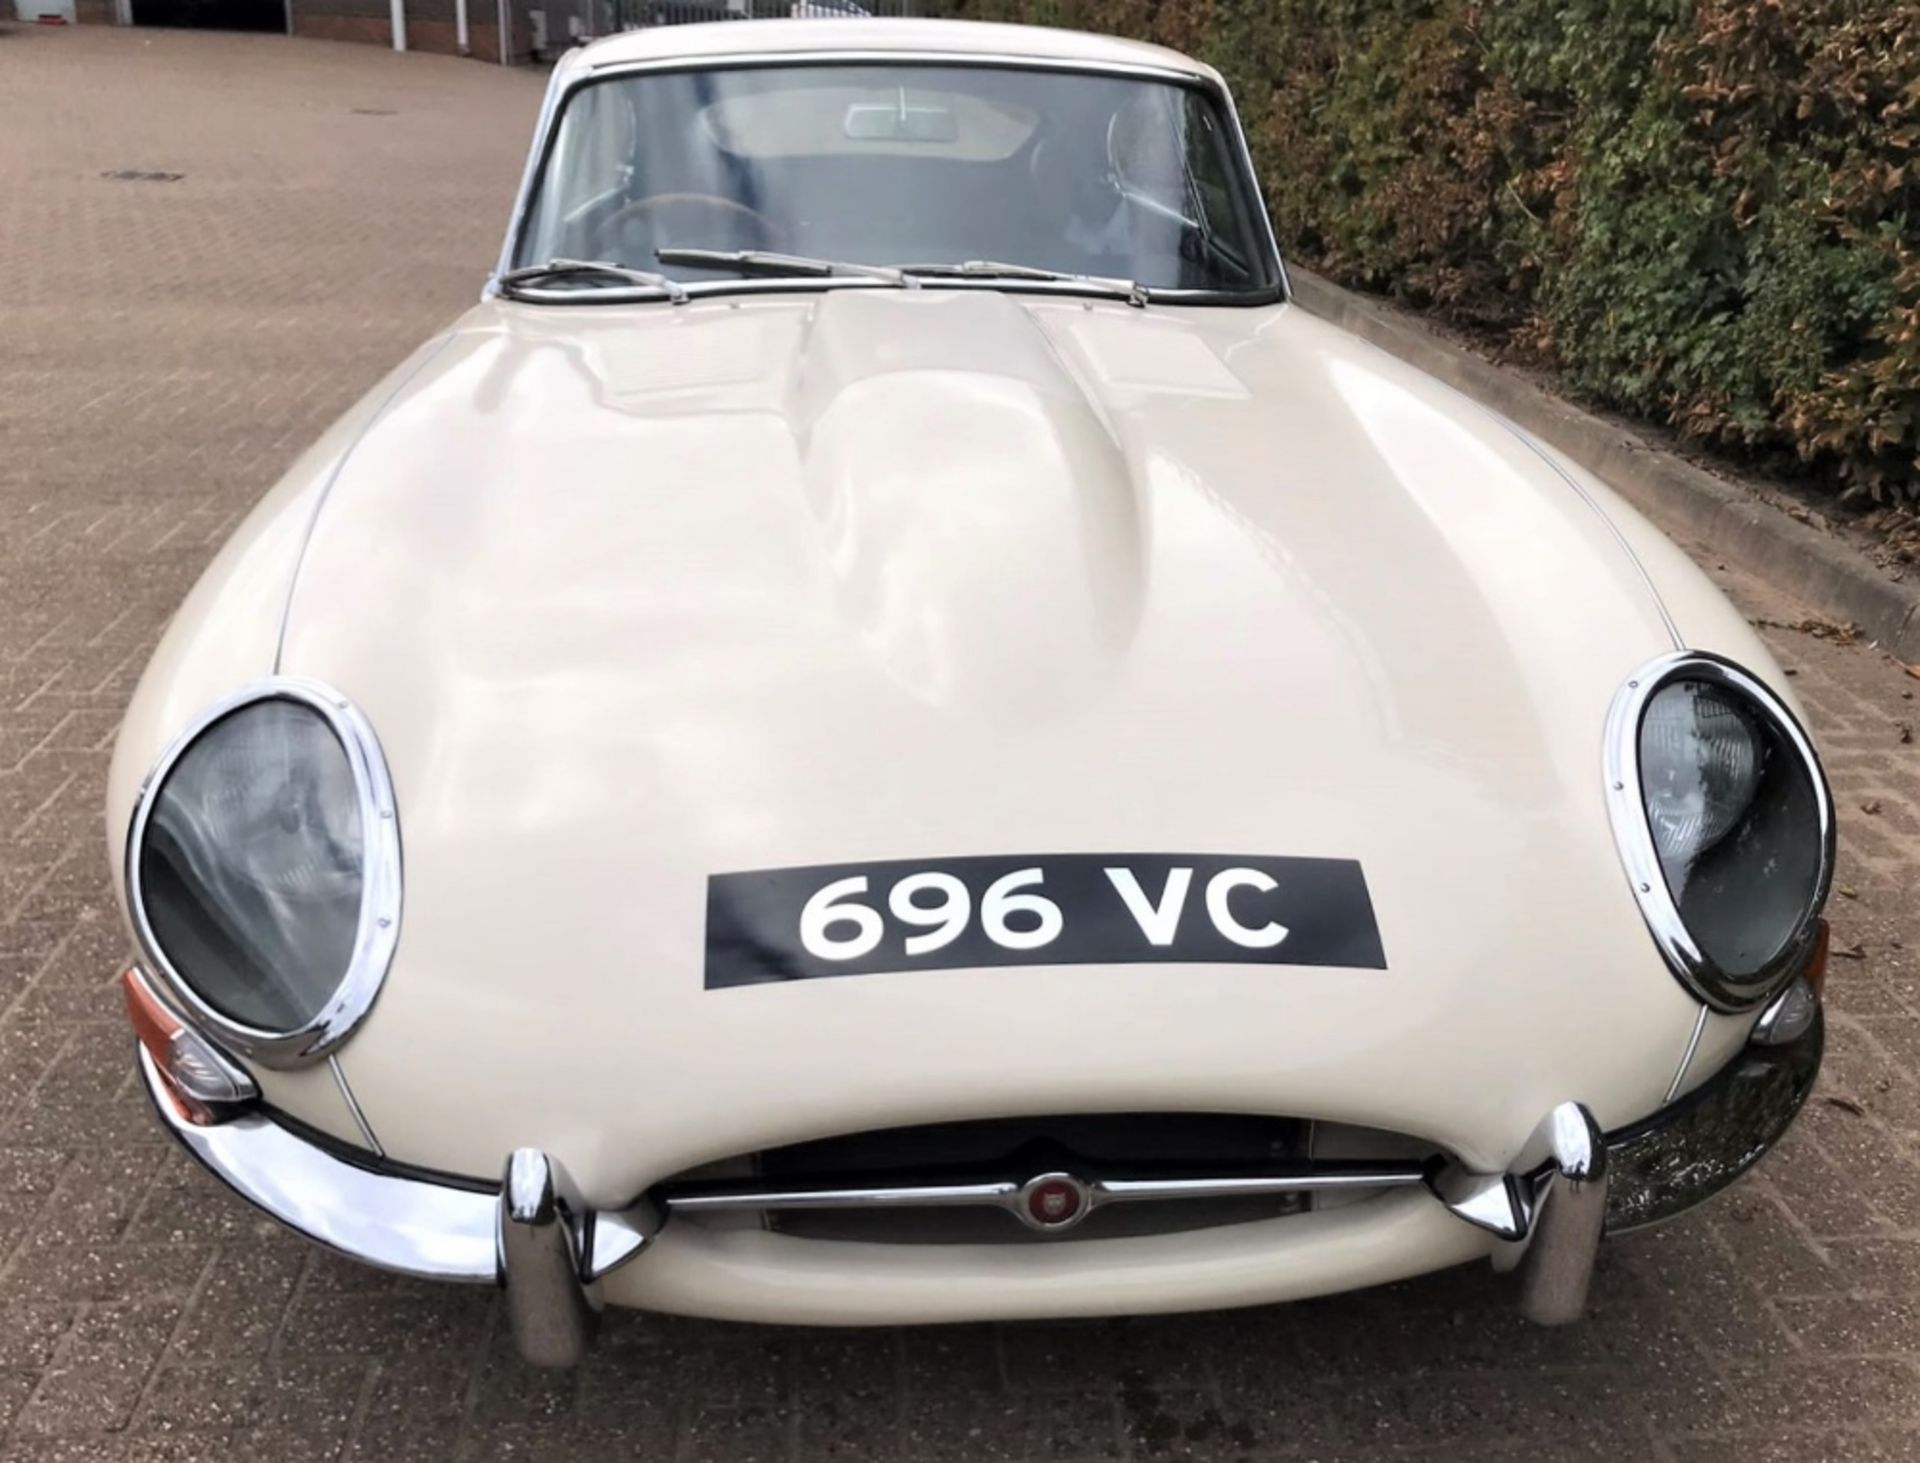 1962 JAGUAR E-TYPE SERIES I FIXED HEAD COUPE Registration Number: 696 VC Chassis Number: 860911 - Image 4 of 12